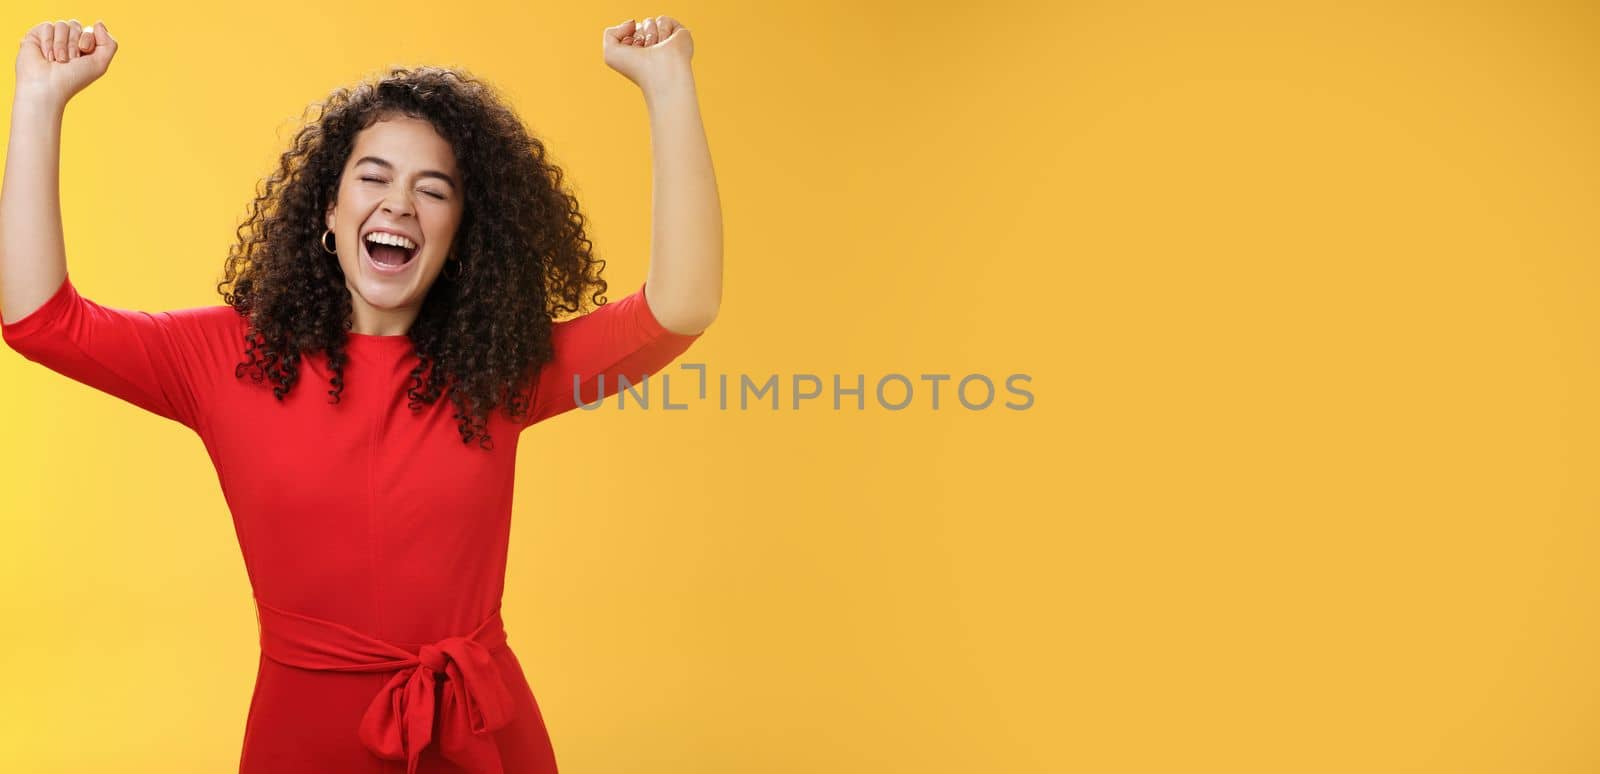 Oh yeah I am winner, on top of world. Excited ambitious and happy young successful busiensswoman getting promotion yelling yes with broad smile and closed eyes lifting hands in triumph and celebration.